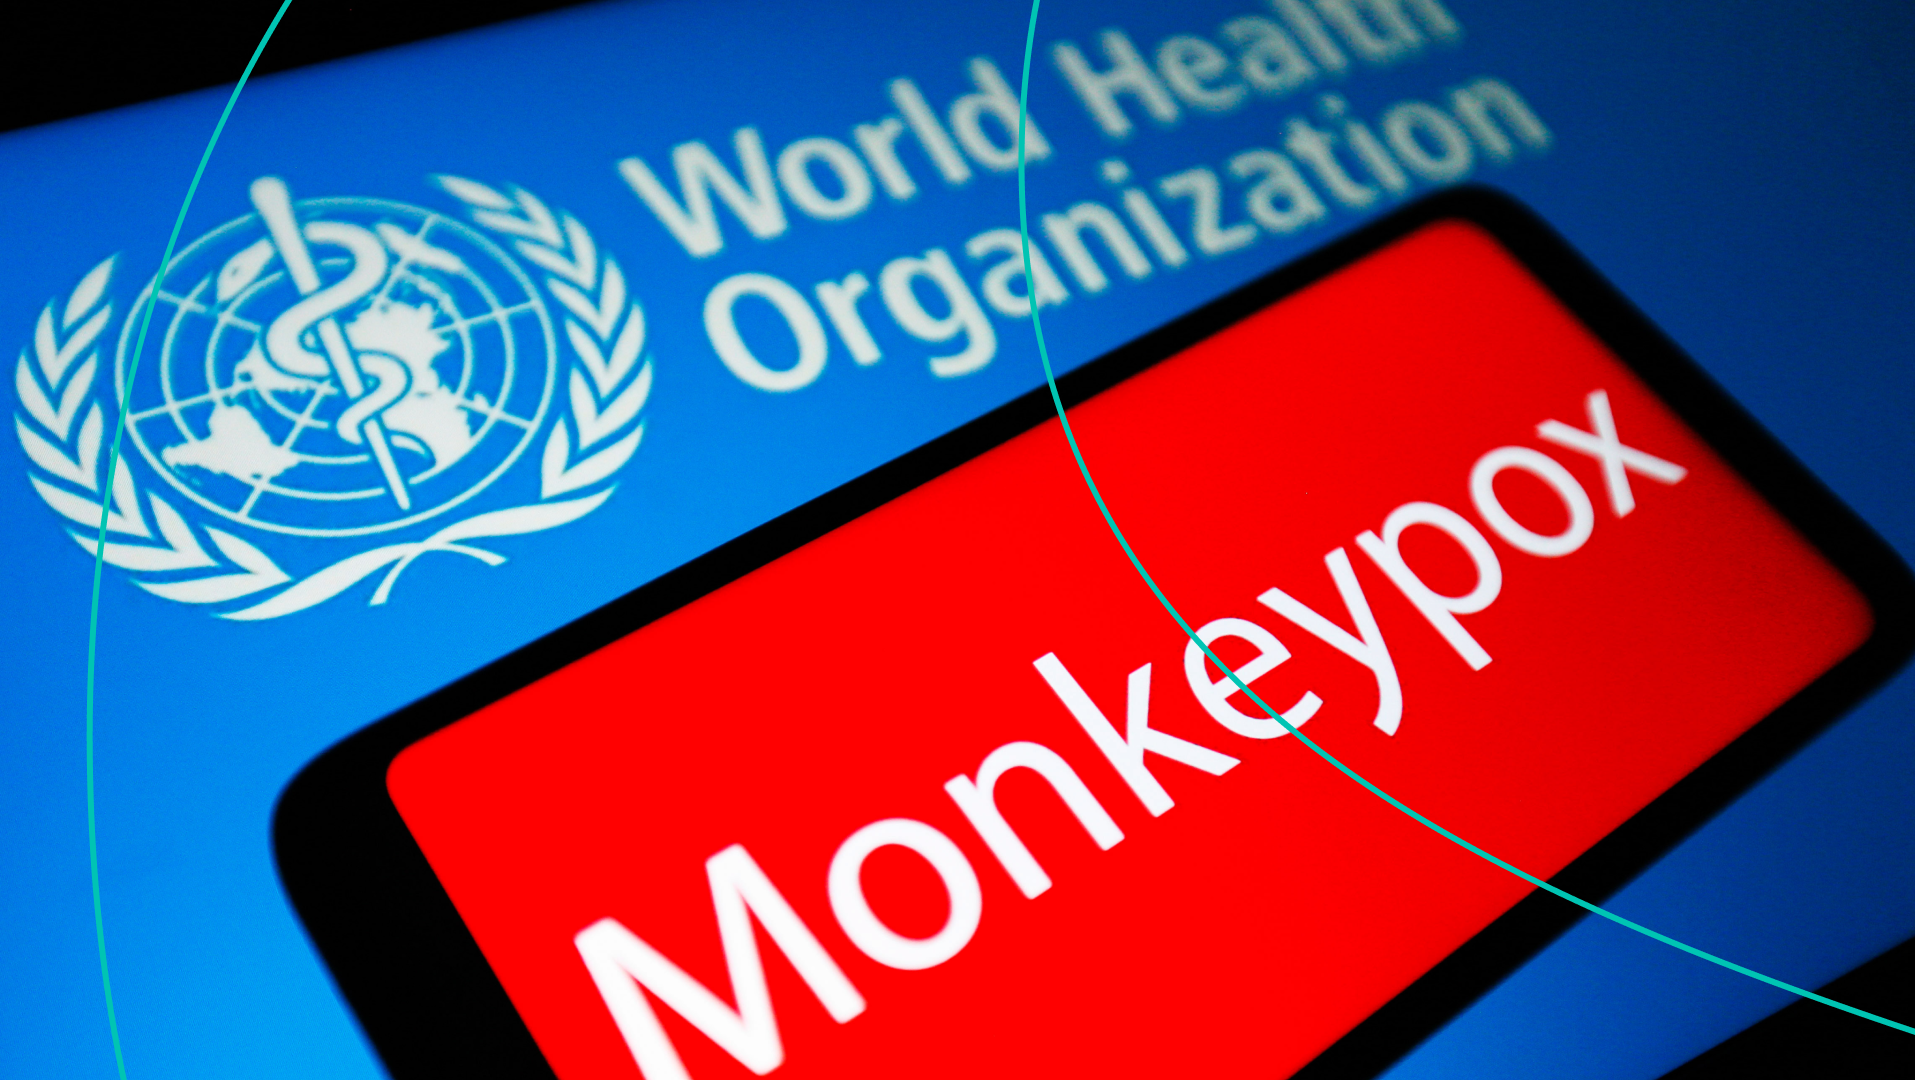 World Health Organization and a phone with Monkeypox written on it